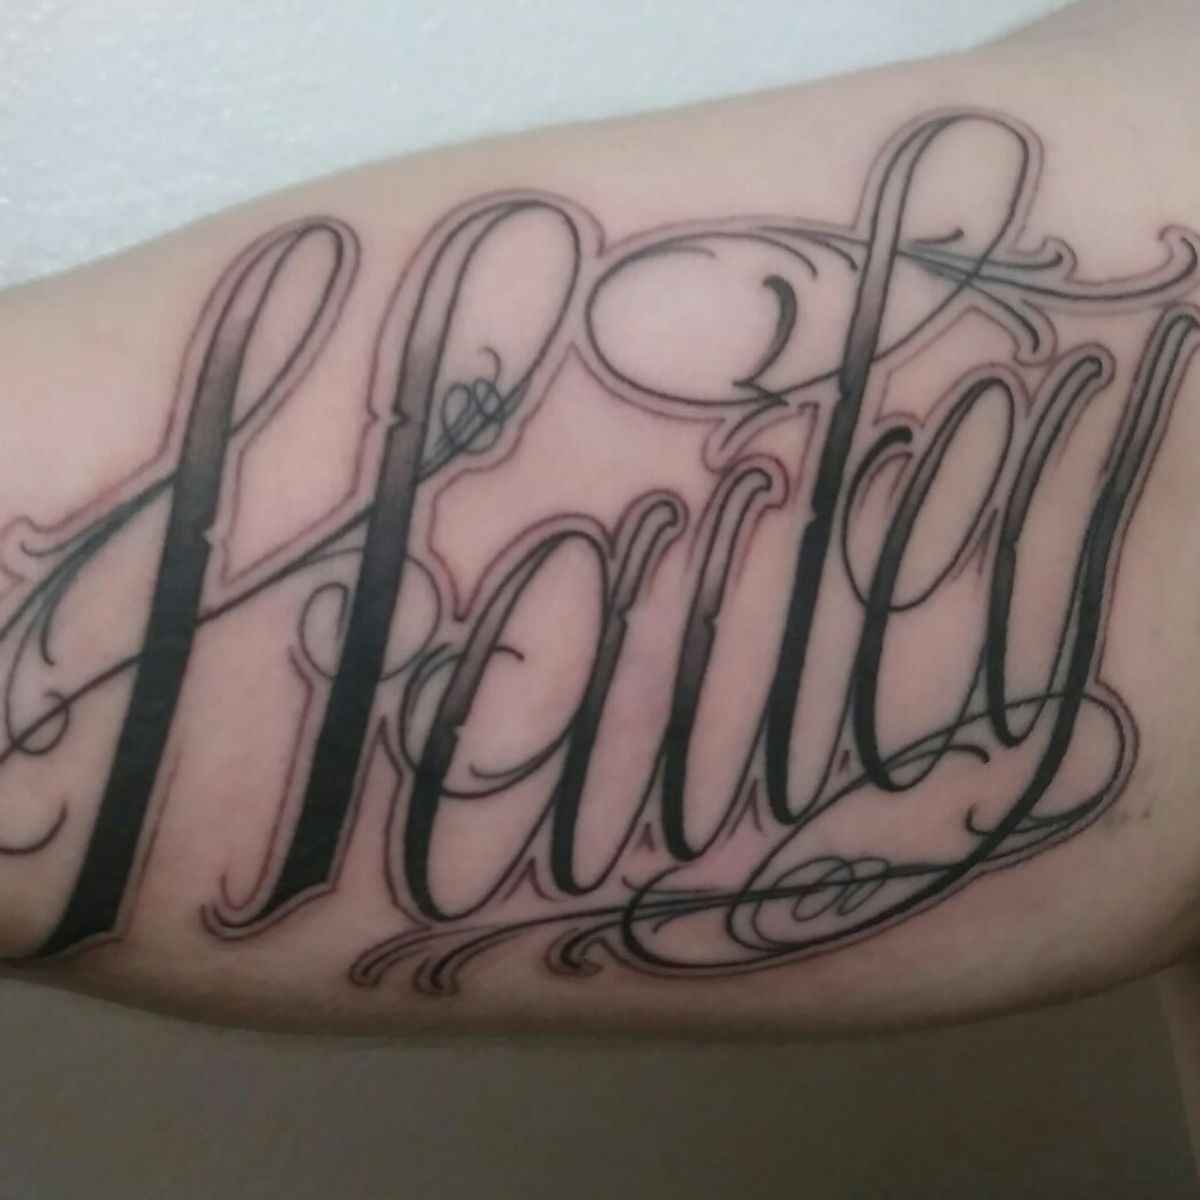 Tattoo uploaded by Chacho Pantoja • Hailey #mylove #script #allengregg ...